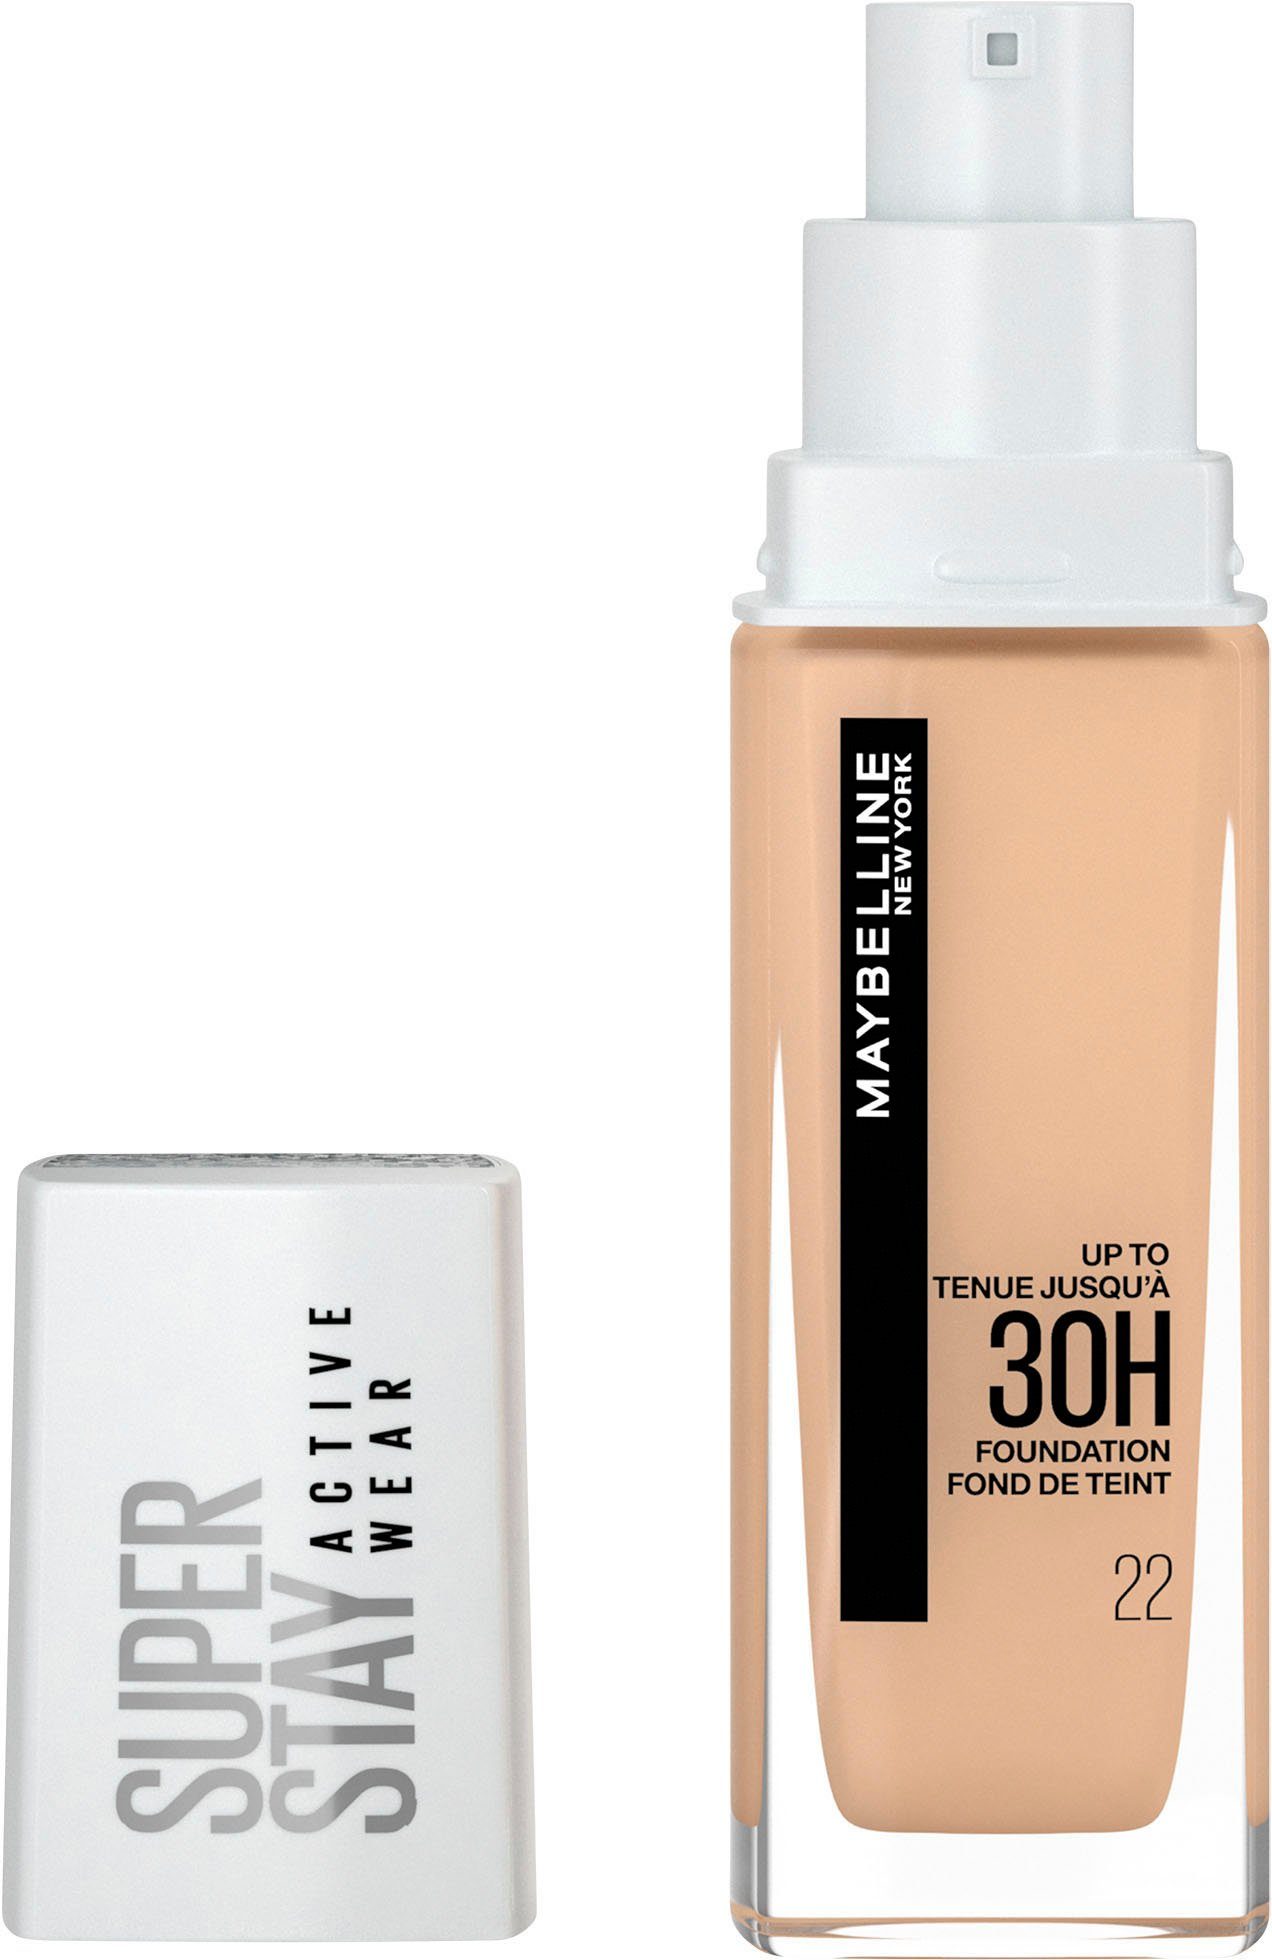 MAYBELLINE NEW YORK Foundation Bisque Stay Active Wear Light 22 Super